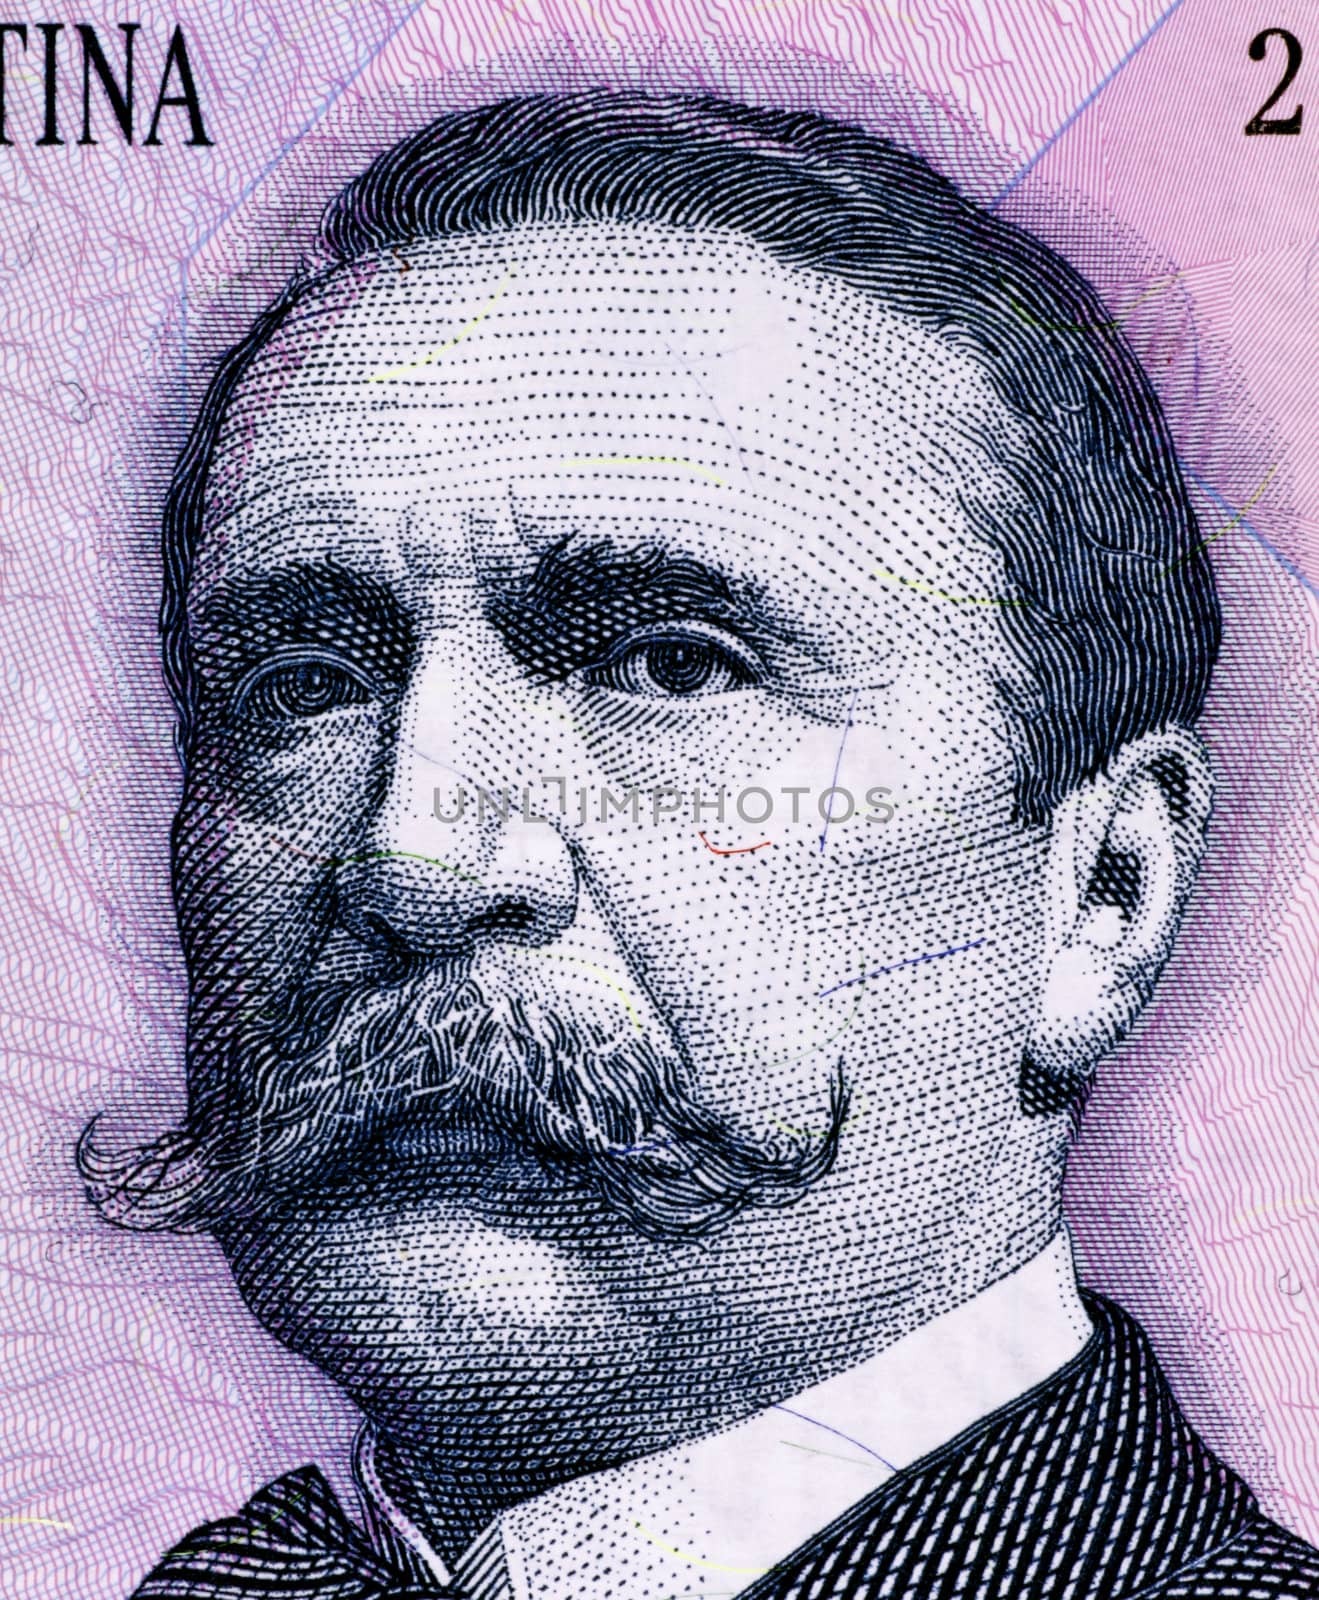 Carlos Pellegrini (1846-1906) on 1 Peso 1993 Banknote from Argentina. President of Argentina during 1890-1892.